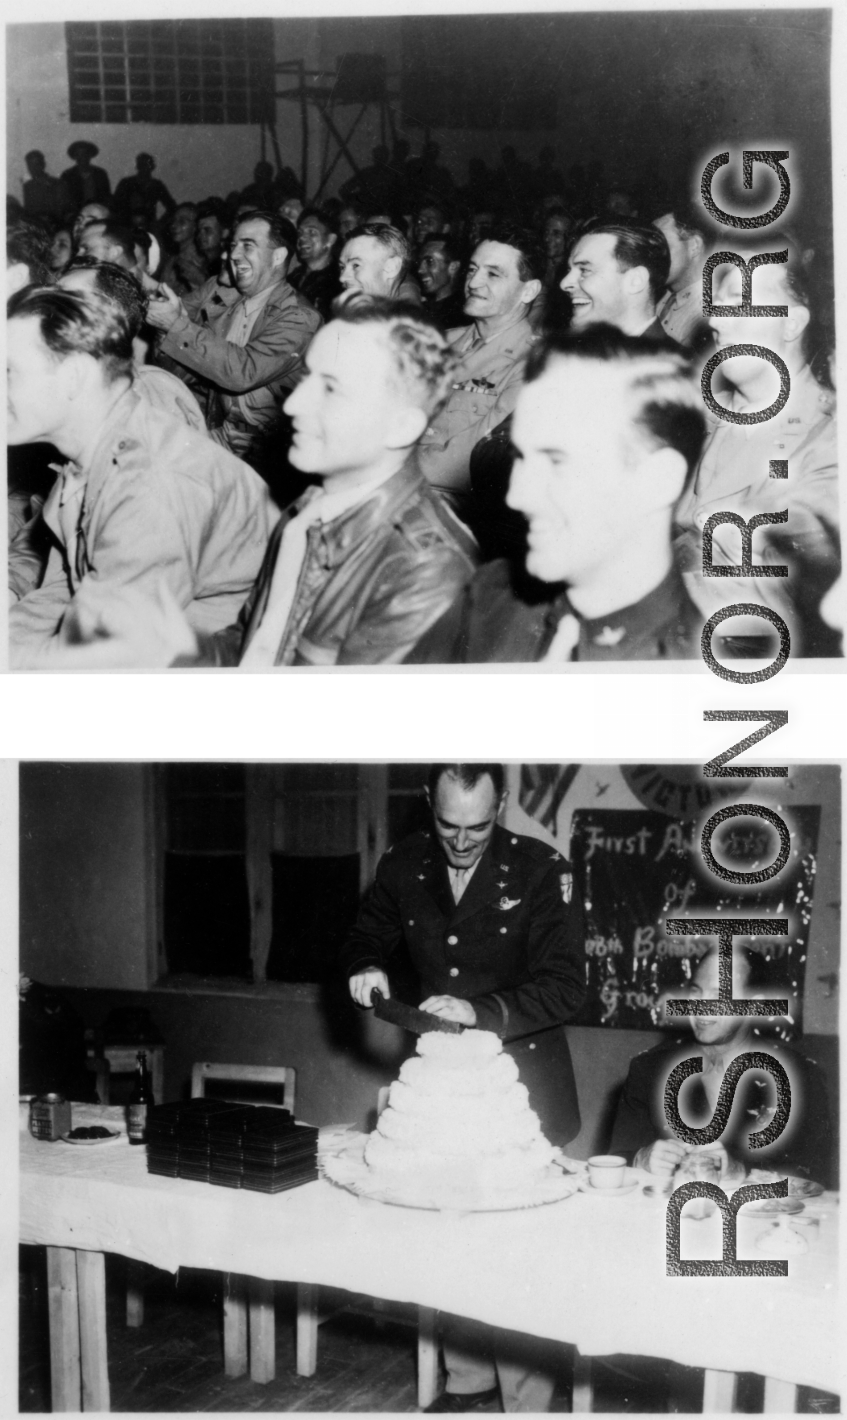 Chennault laughs with others in an audience; Officer cuts cake at 308th one year anniversary event. In the CBI during WWII.  Images provided by Emery and Beth Vrana.